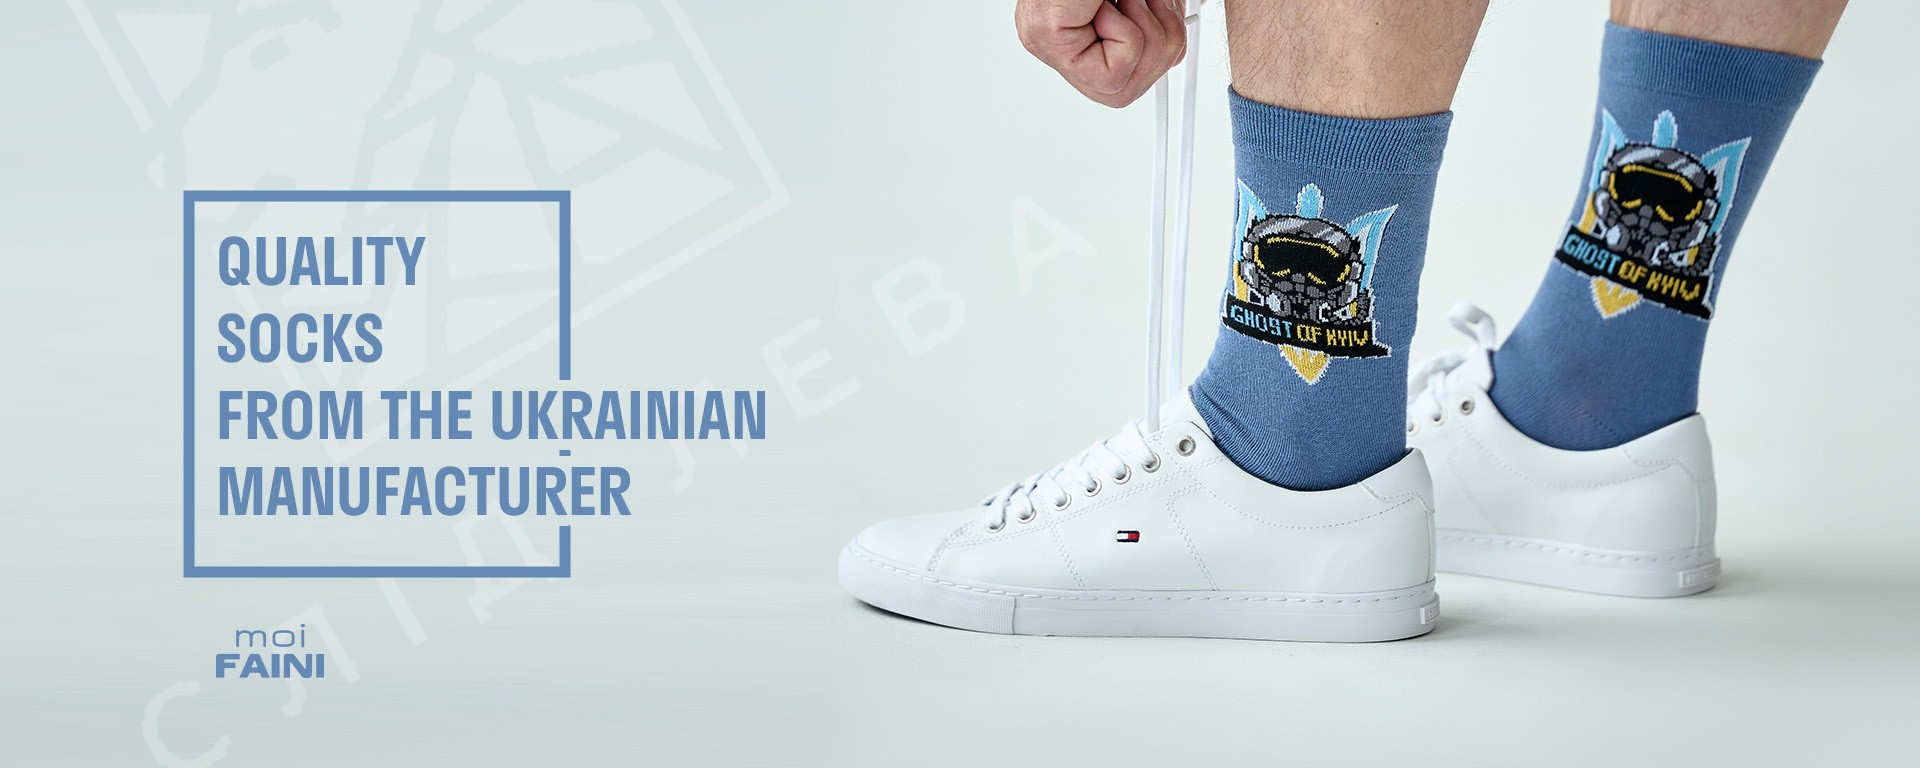 Quality socks from the Ukrainian manufacturer